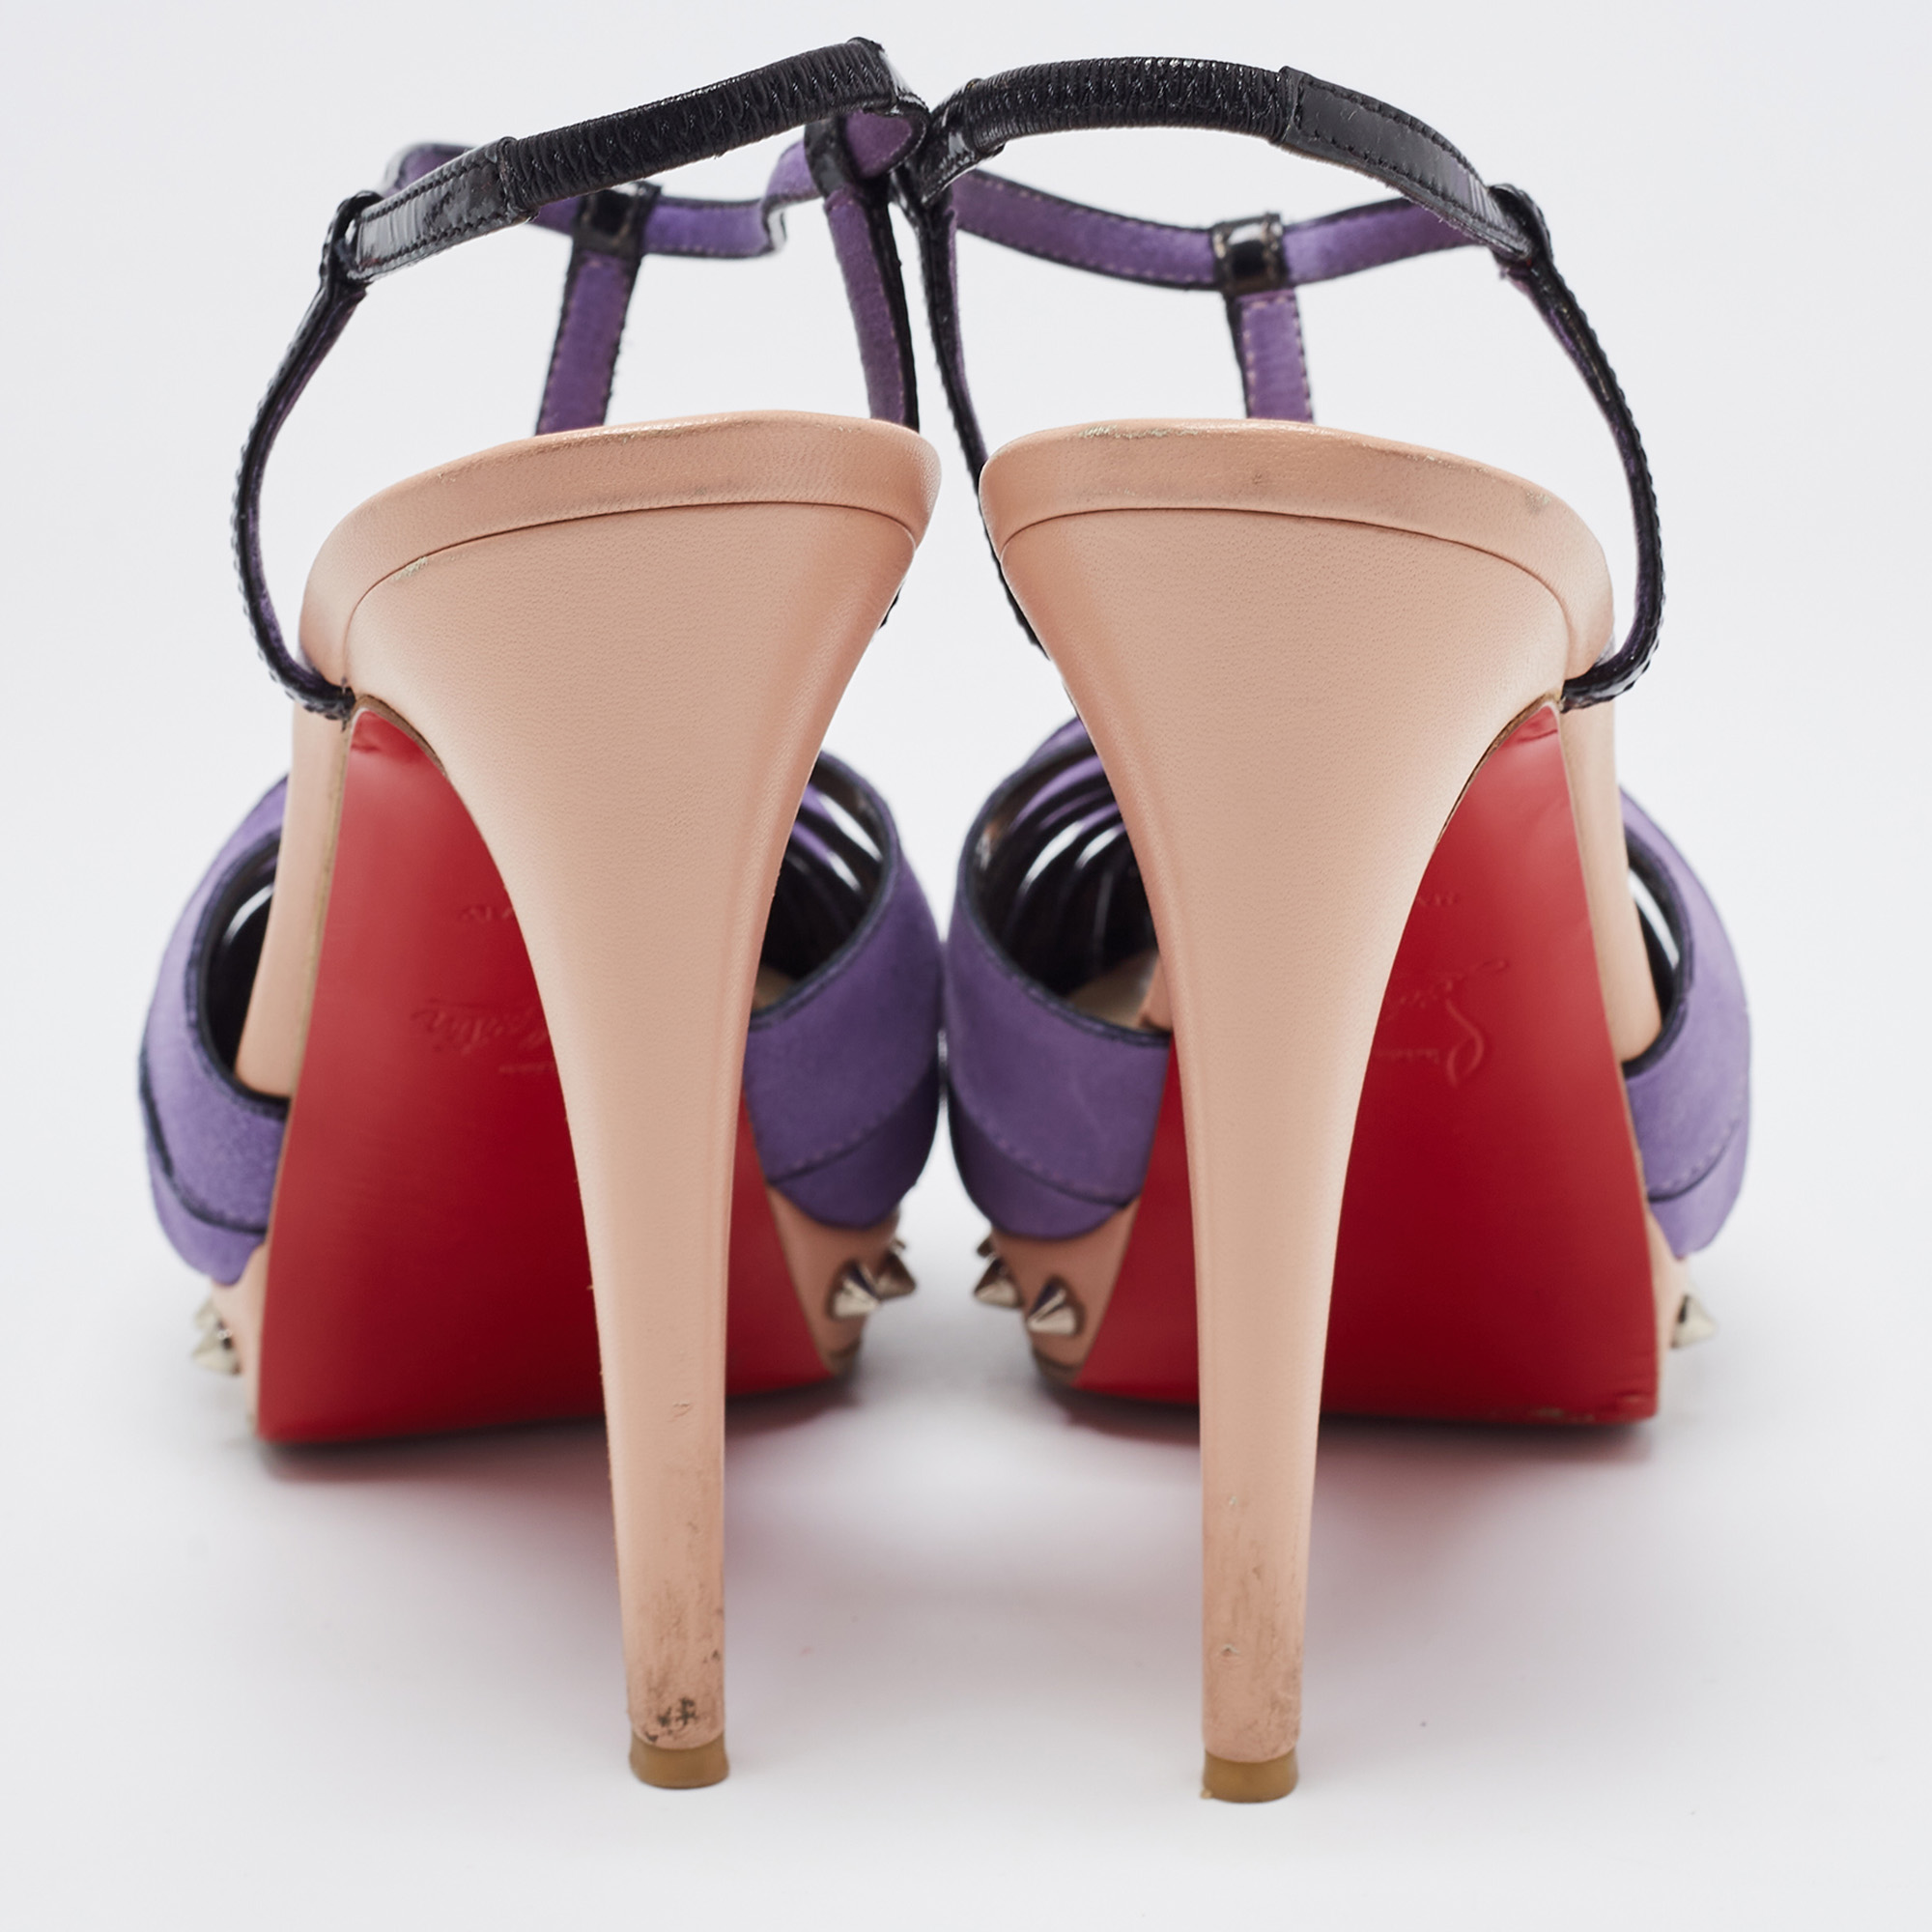 Christian Louboutin Purple/Black Suede And Patent Leather Zigounette Spiked Slingback Sandals Size 38.5